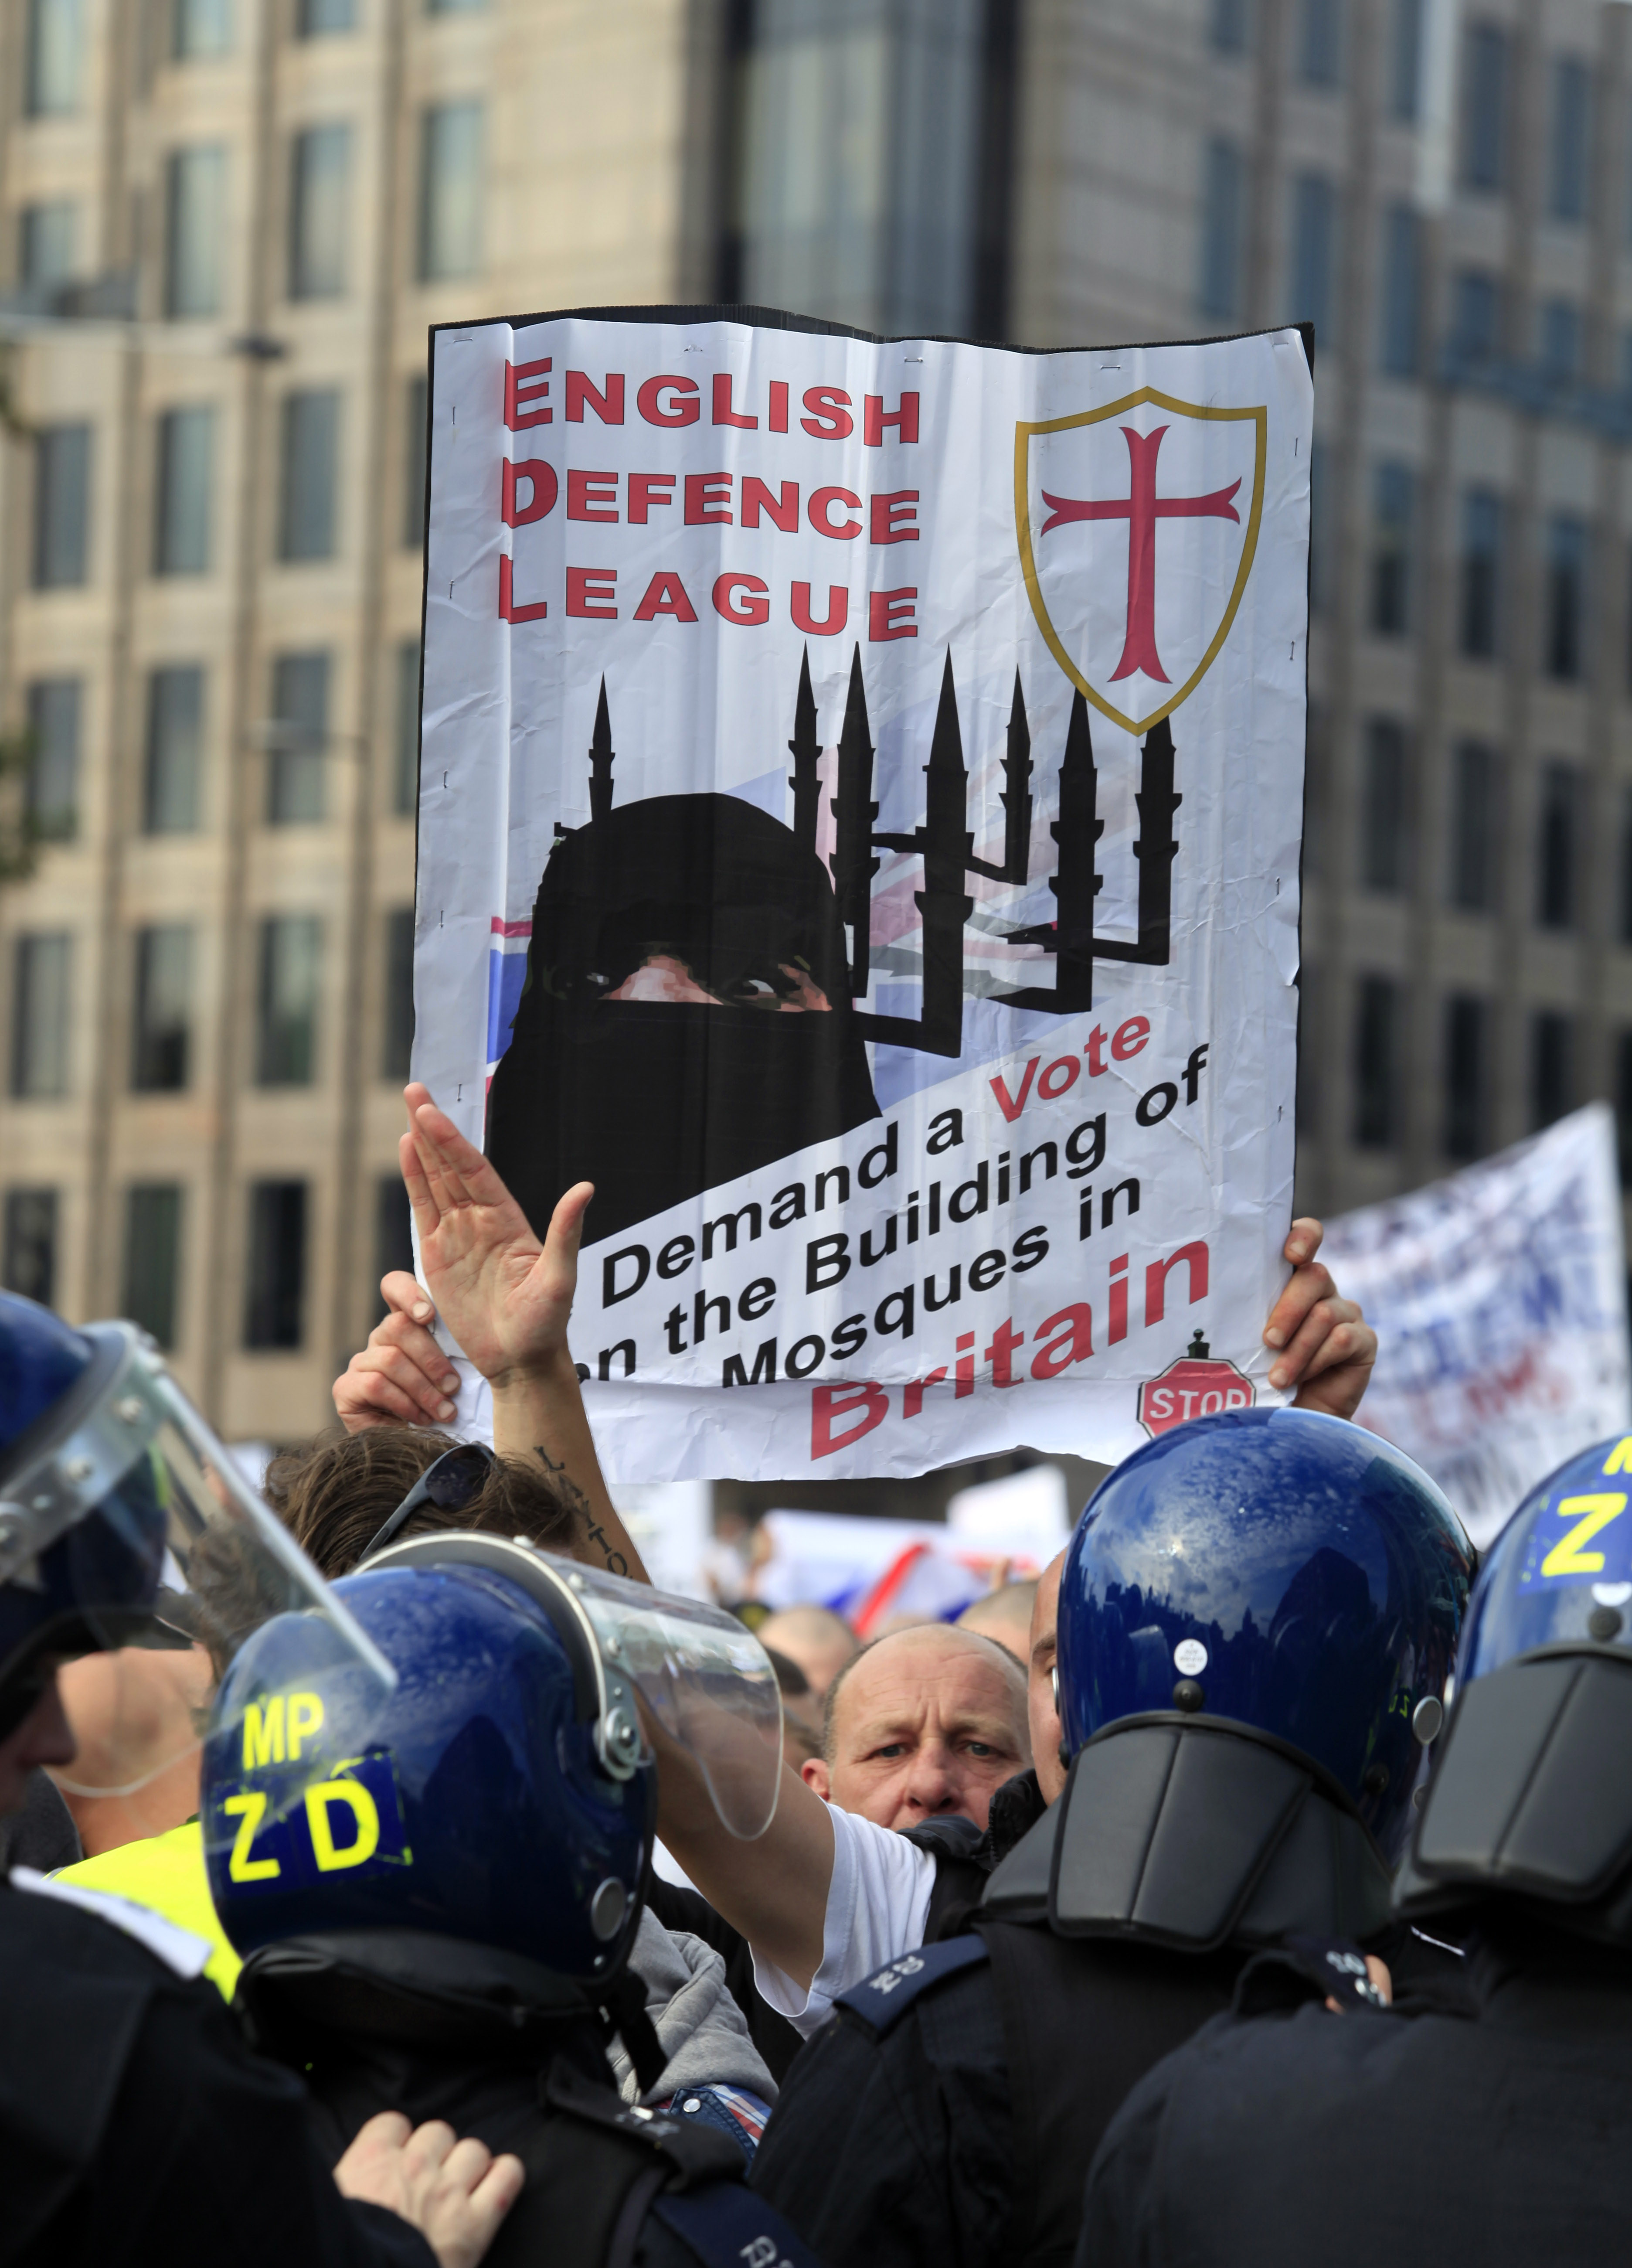 Demonstration, Swedish Defence League, English Defence League, Högerextrema, Muslimer, Protester